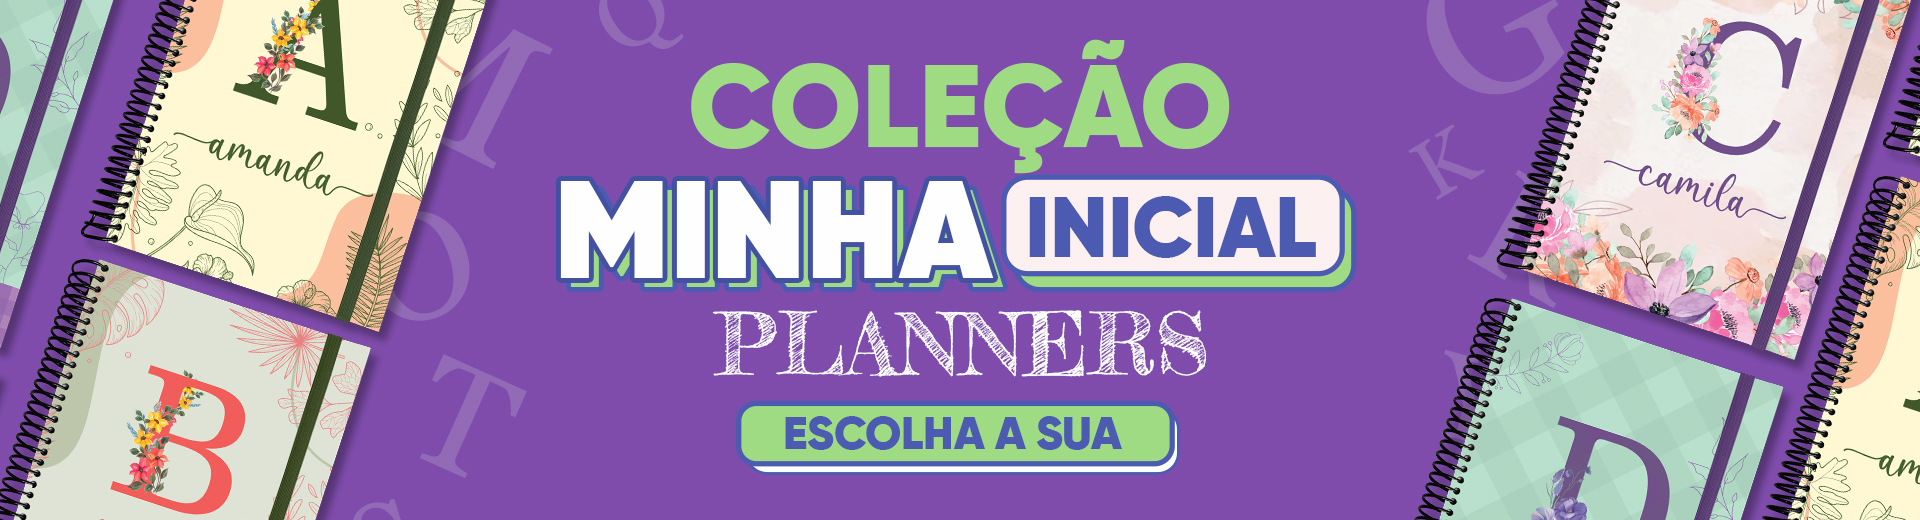 Banner inical Planners